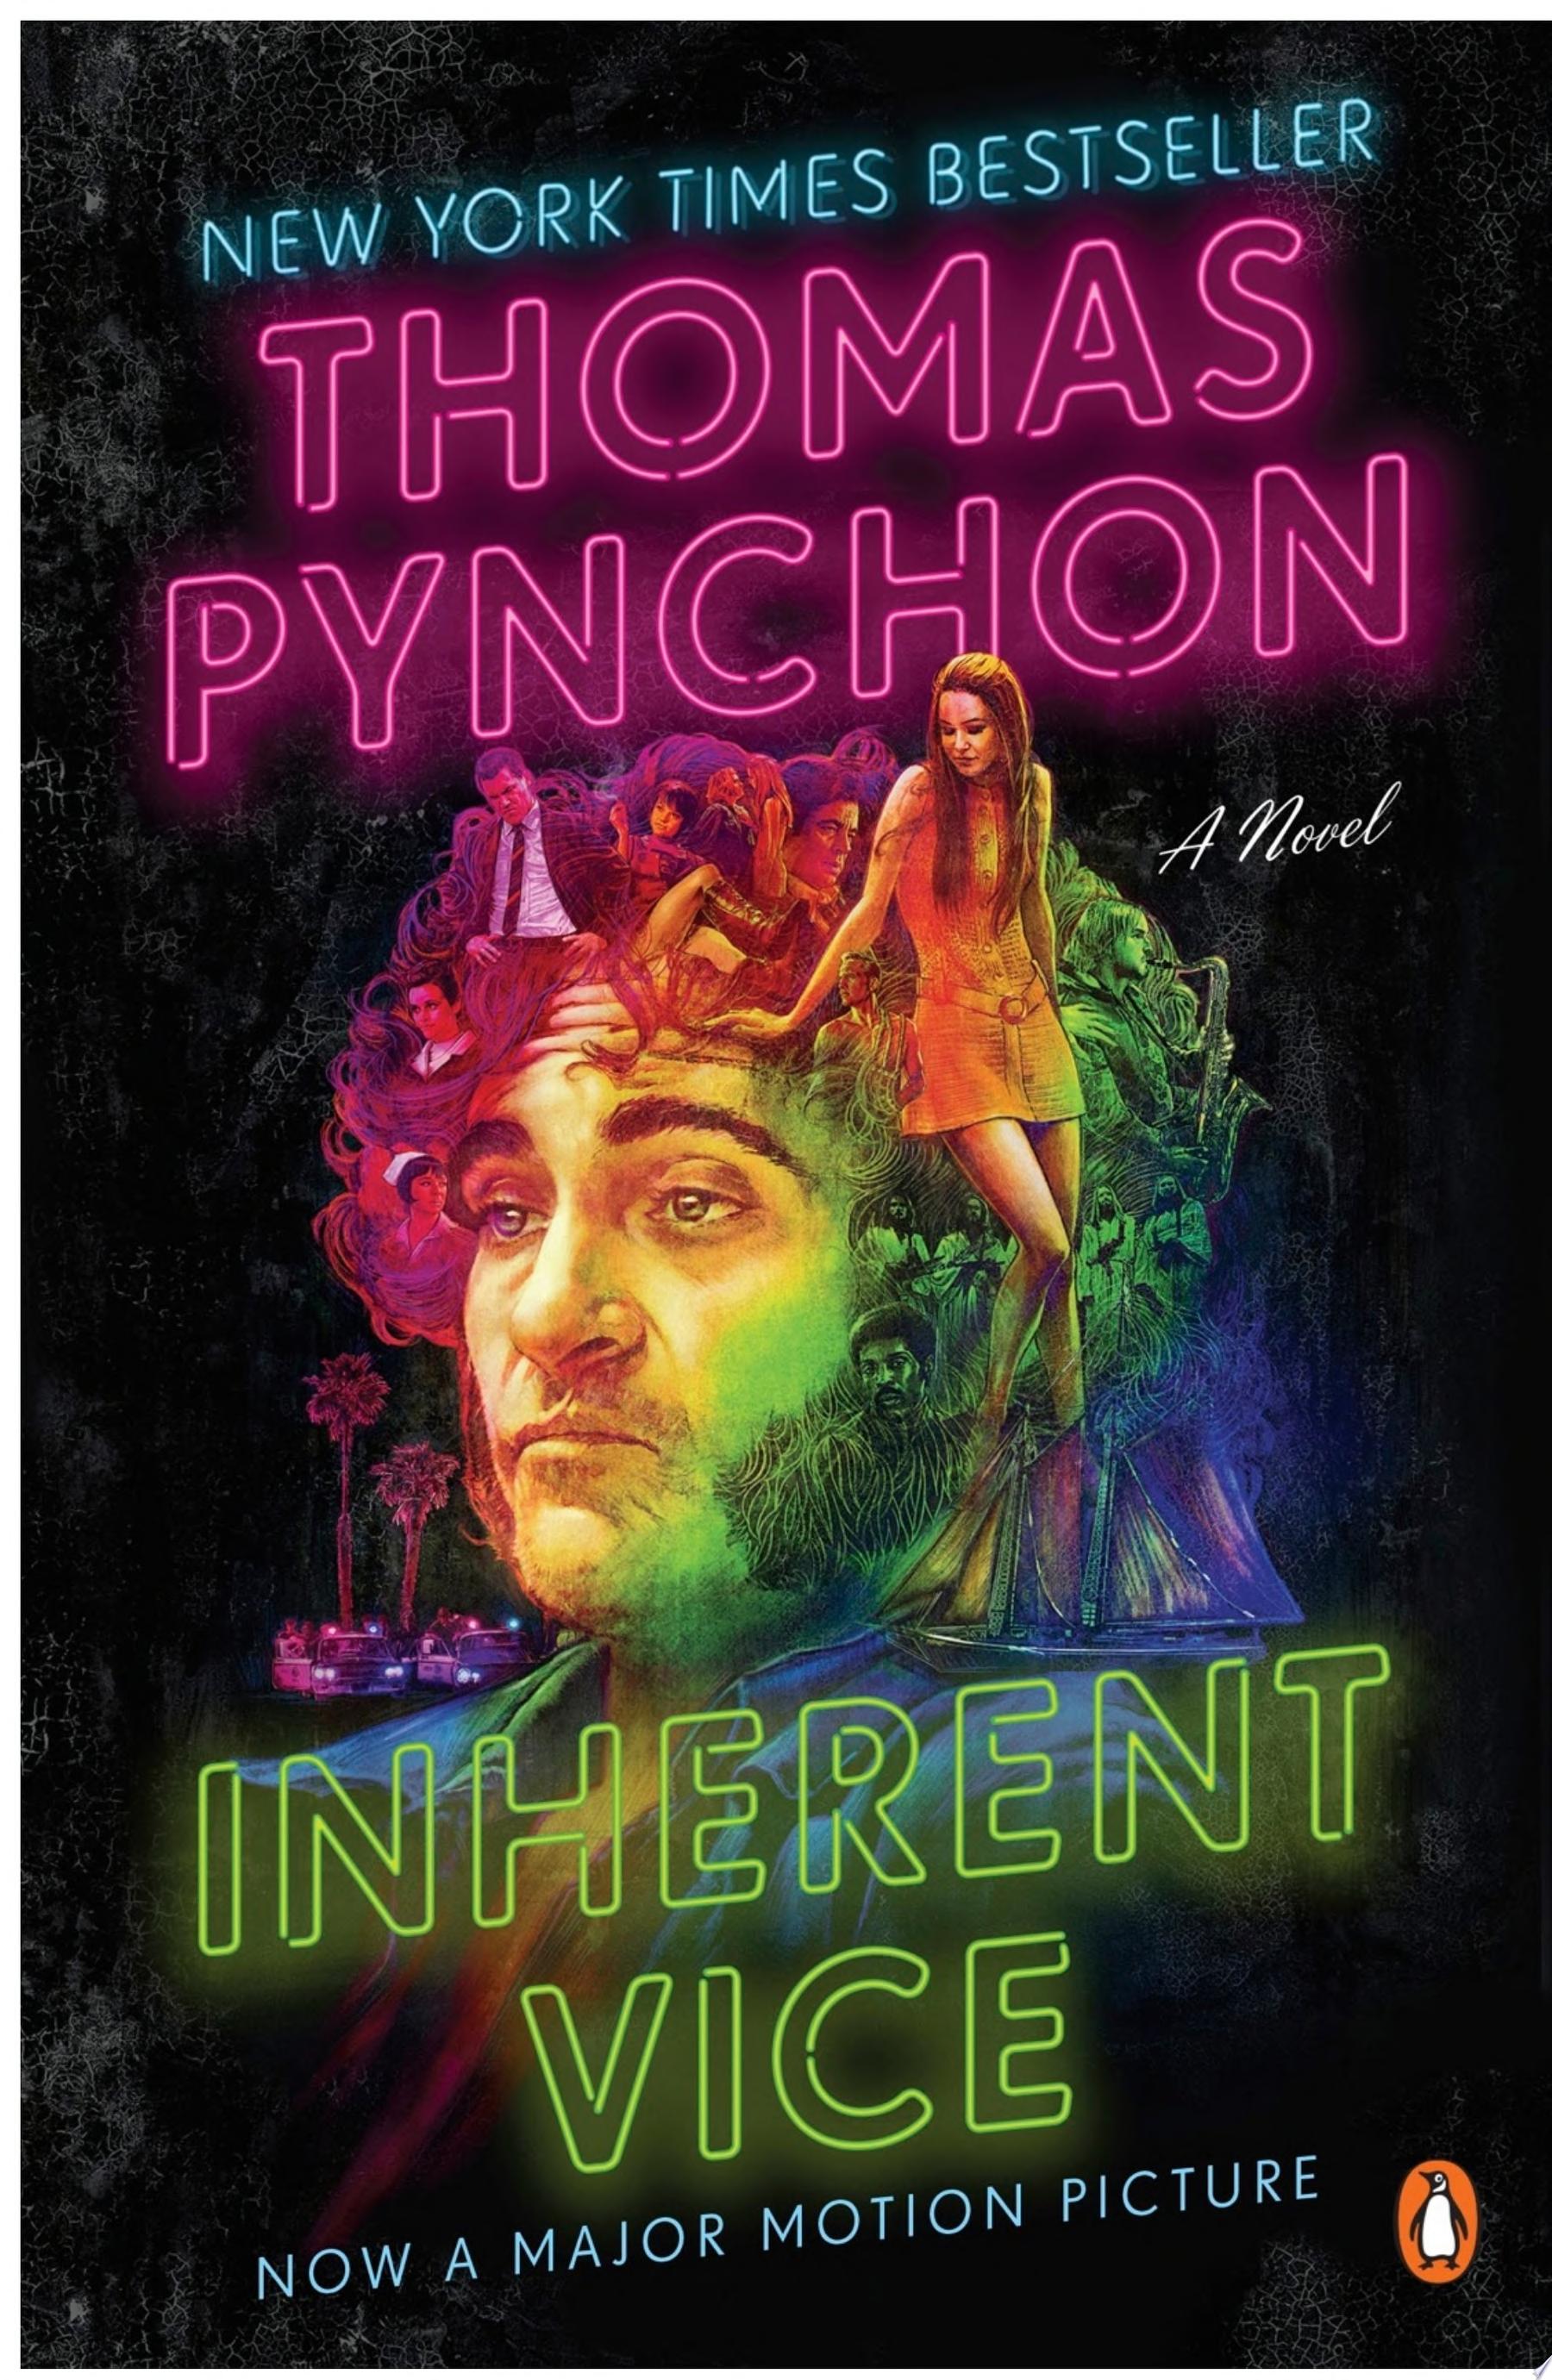 Image for "Inherent Vice"